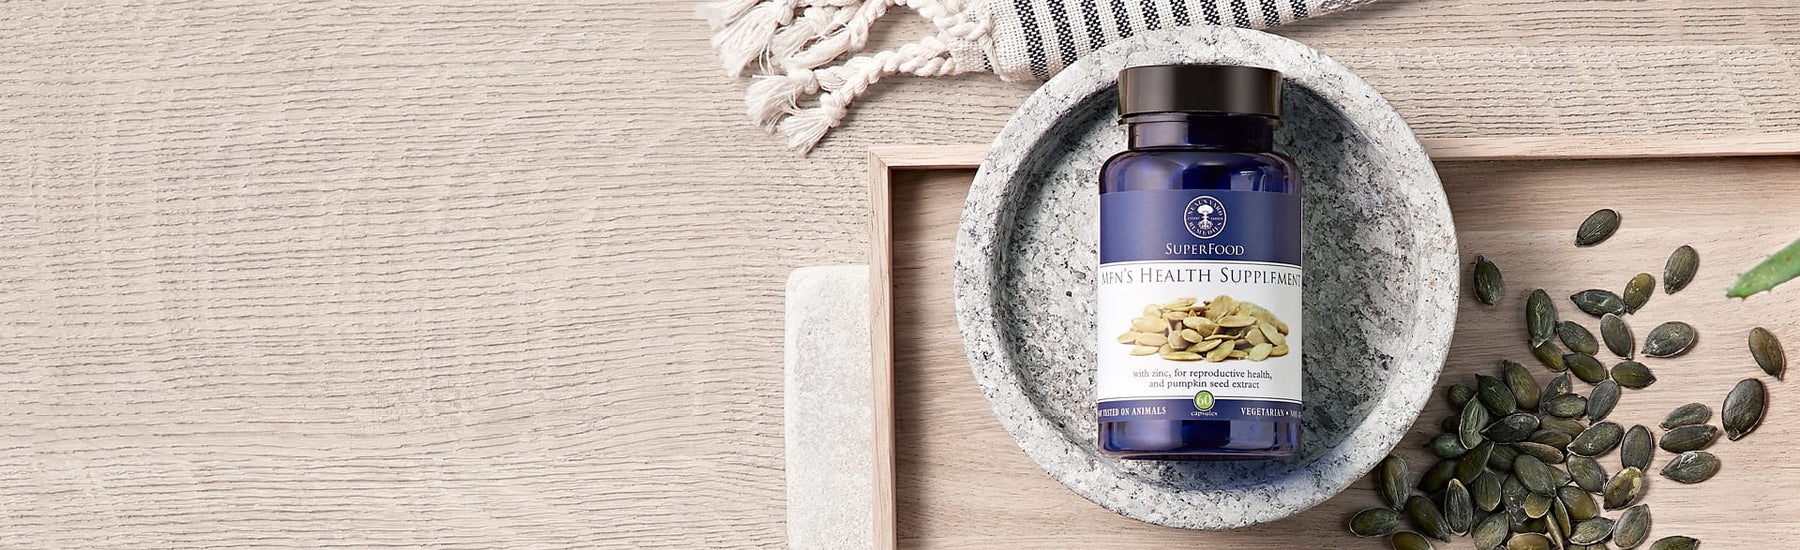 Picture of a supplement aim to support Men's health by Neal's Yard Remedies